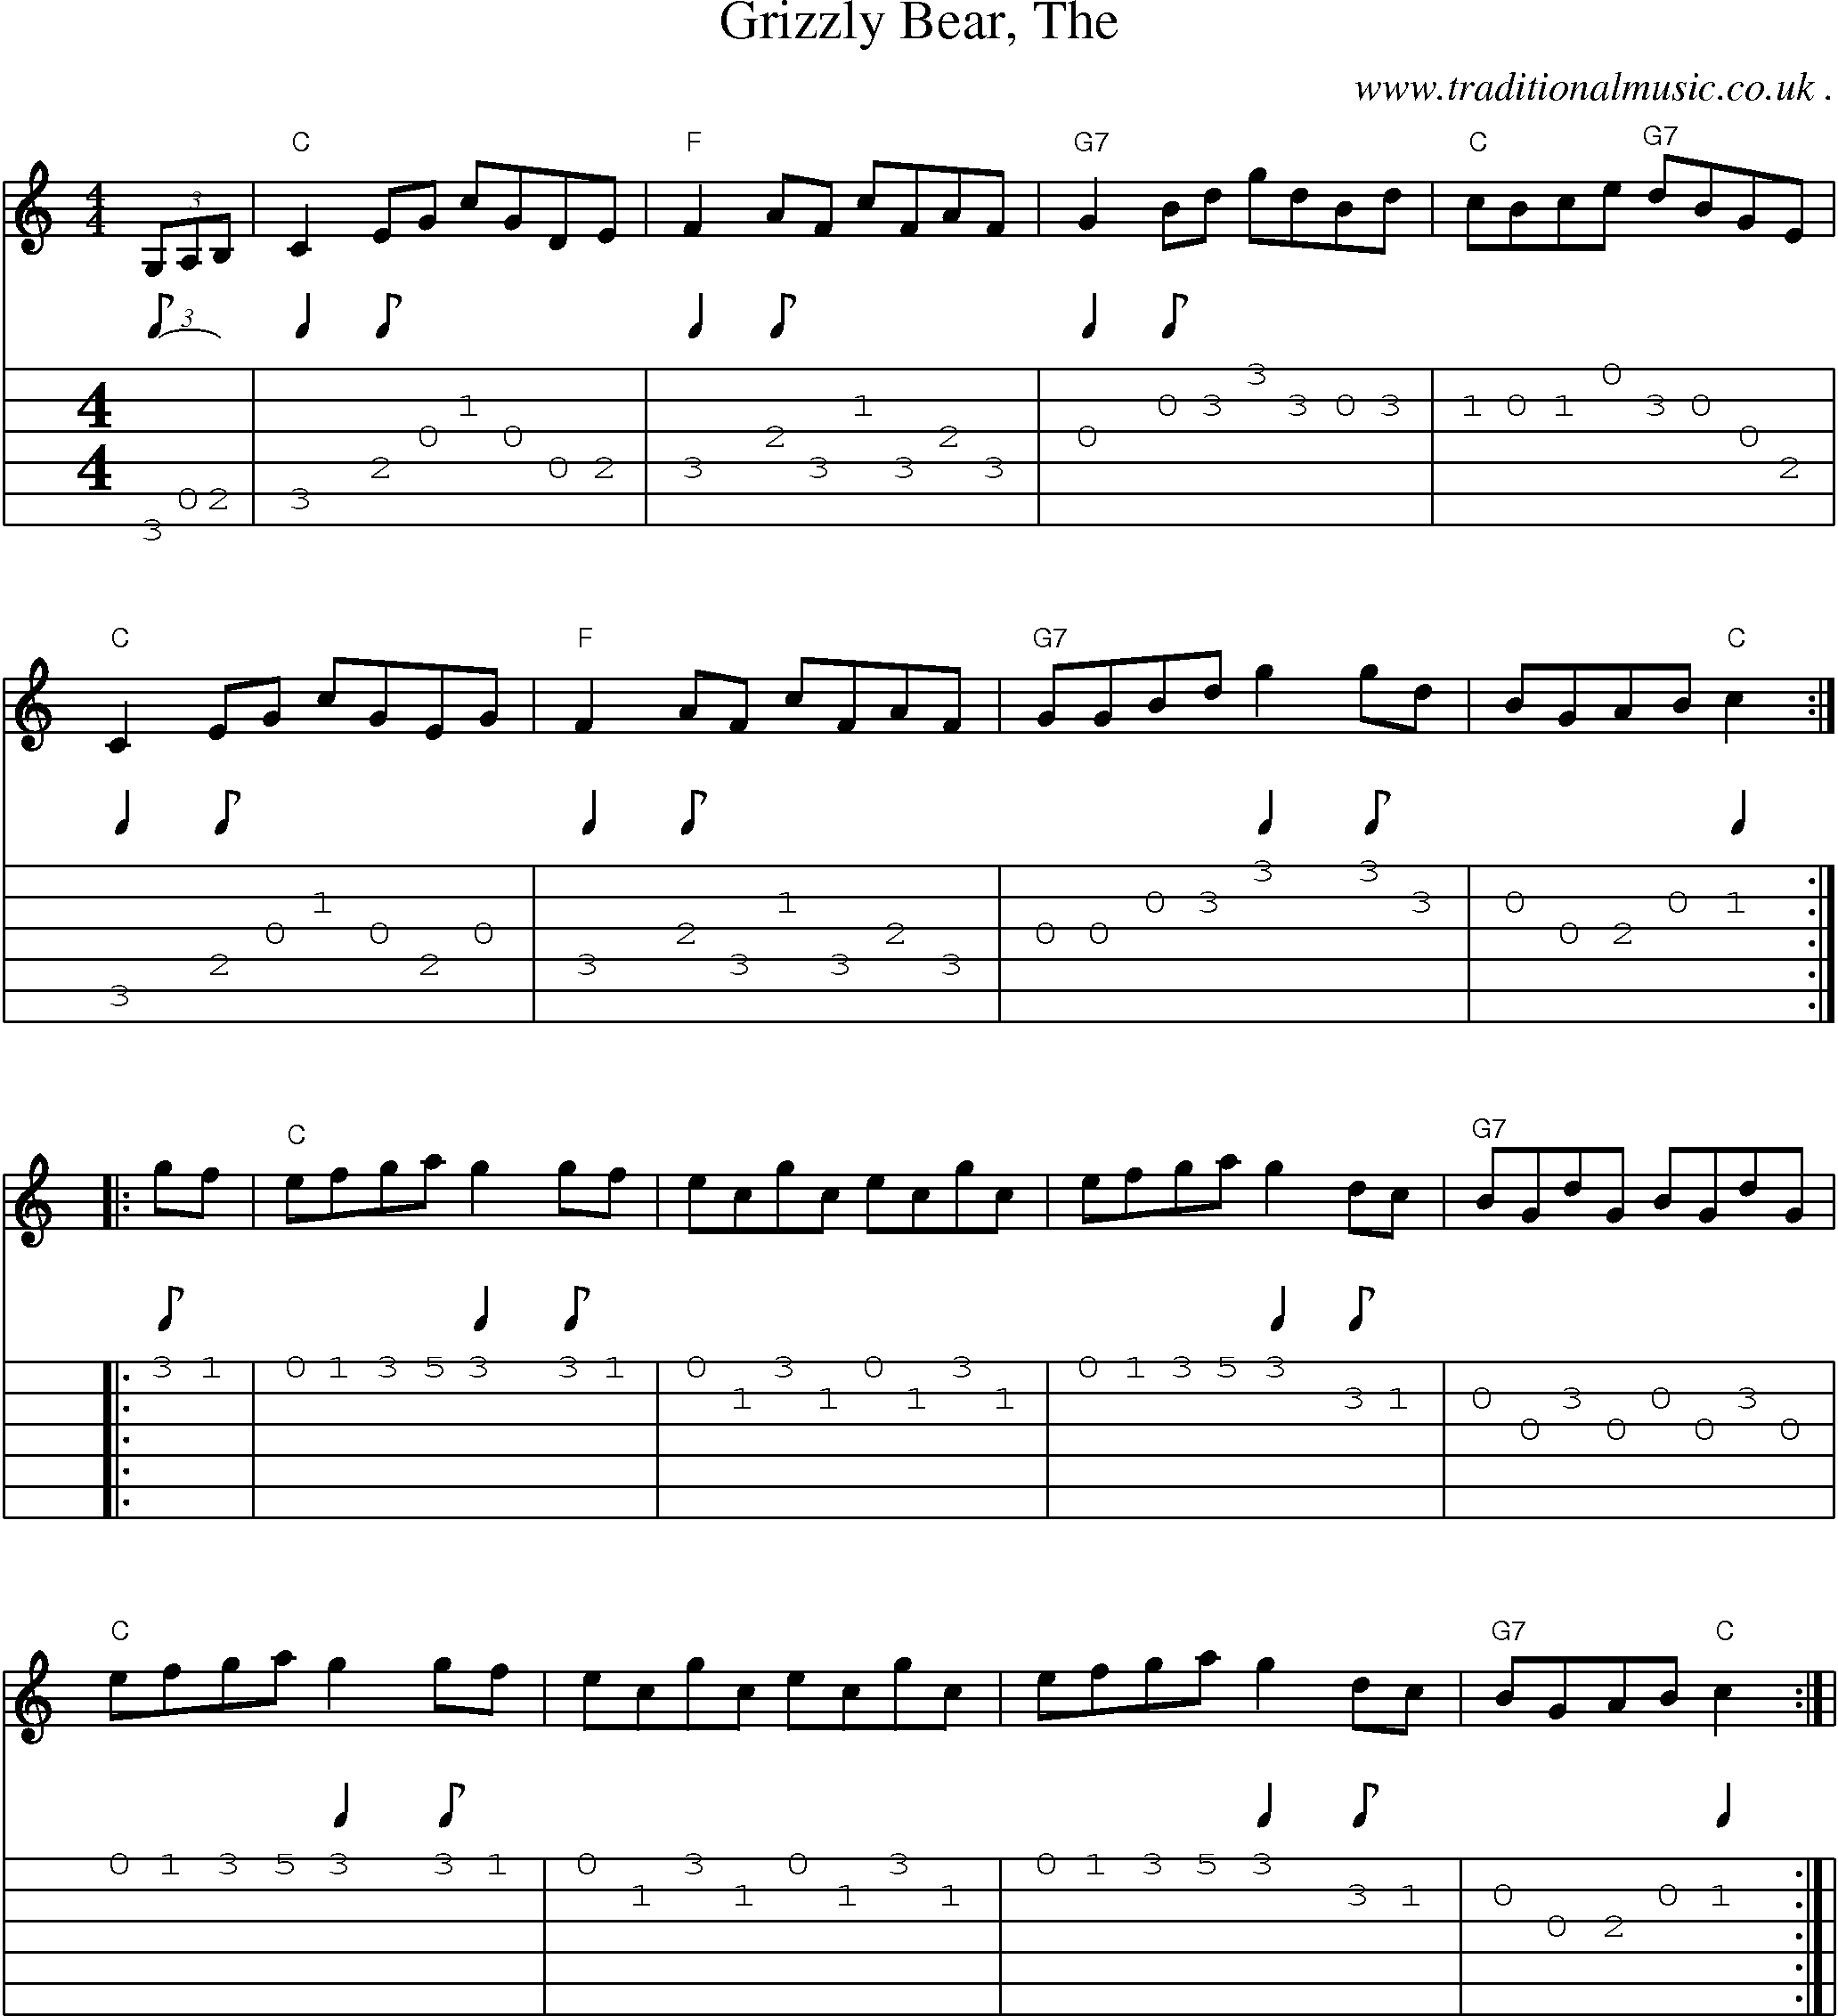 Music Score and Guitar Tabs for Grizzly Bear The